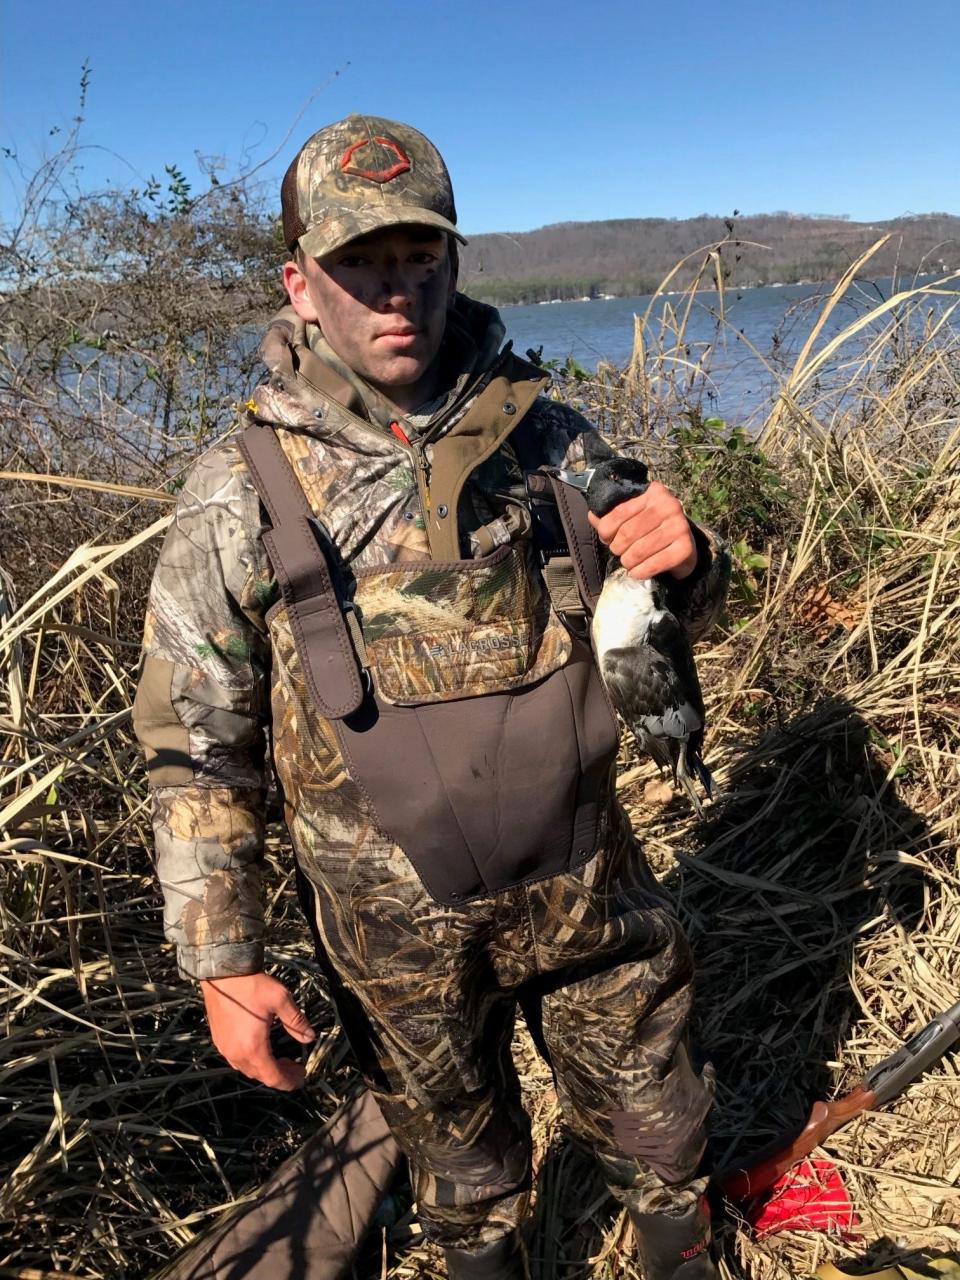 Jack Henry Milligan, a good friend of Will Reichard's, on a duck hunting trip.